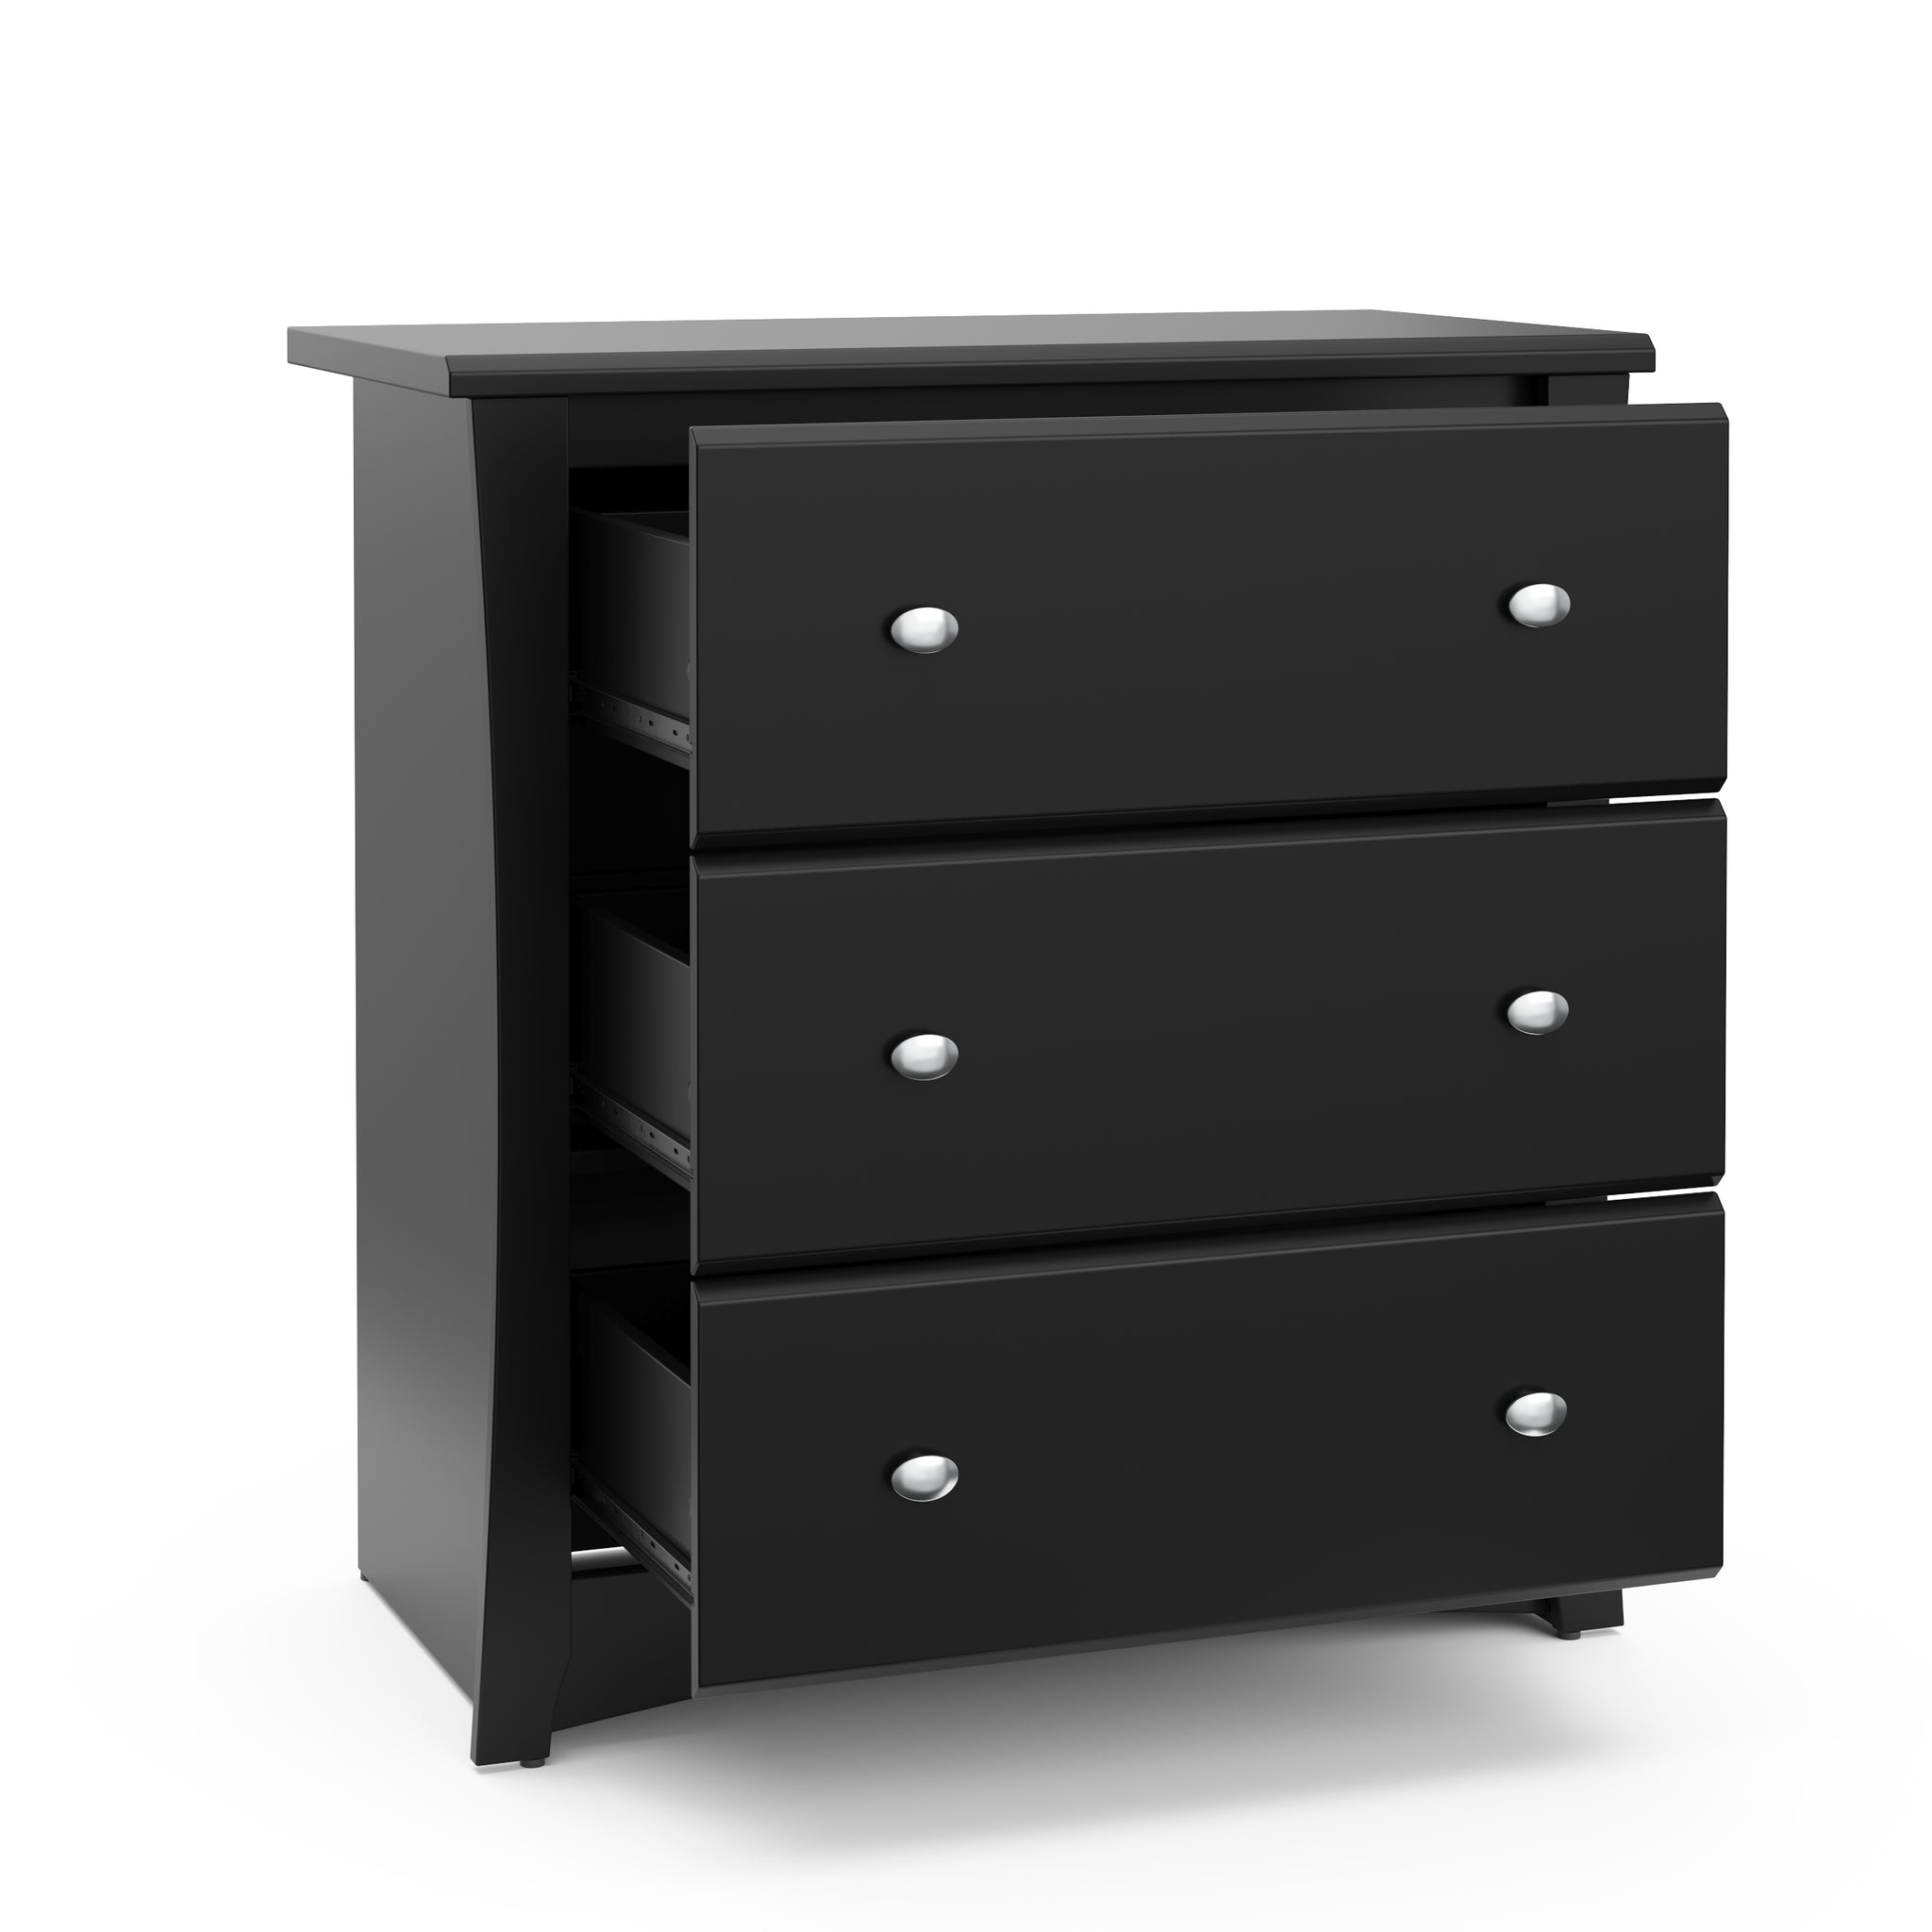 black 3 drawer chest with 3 open drawers